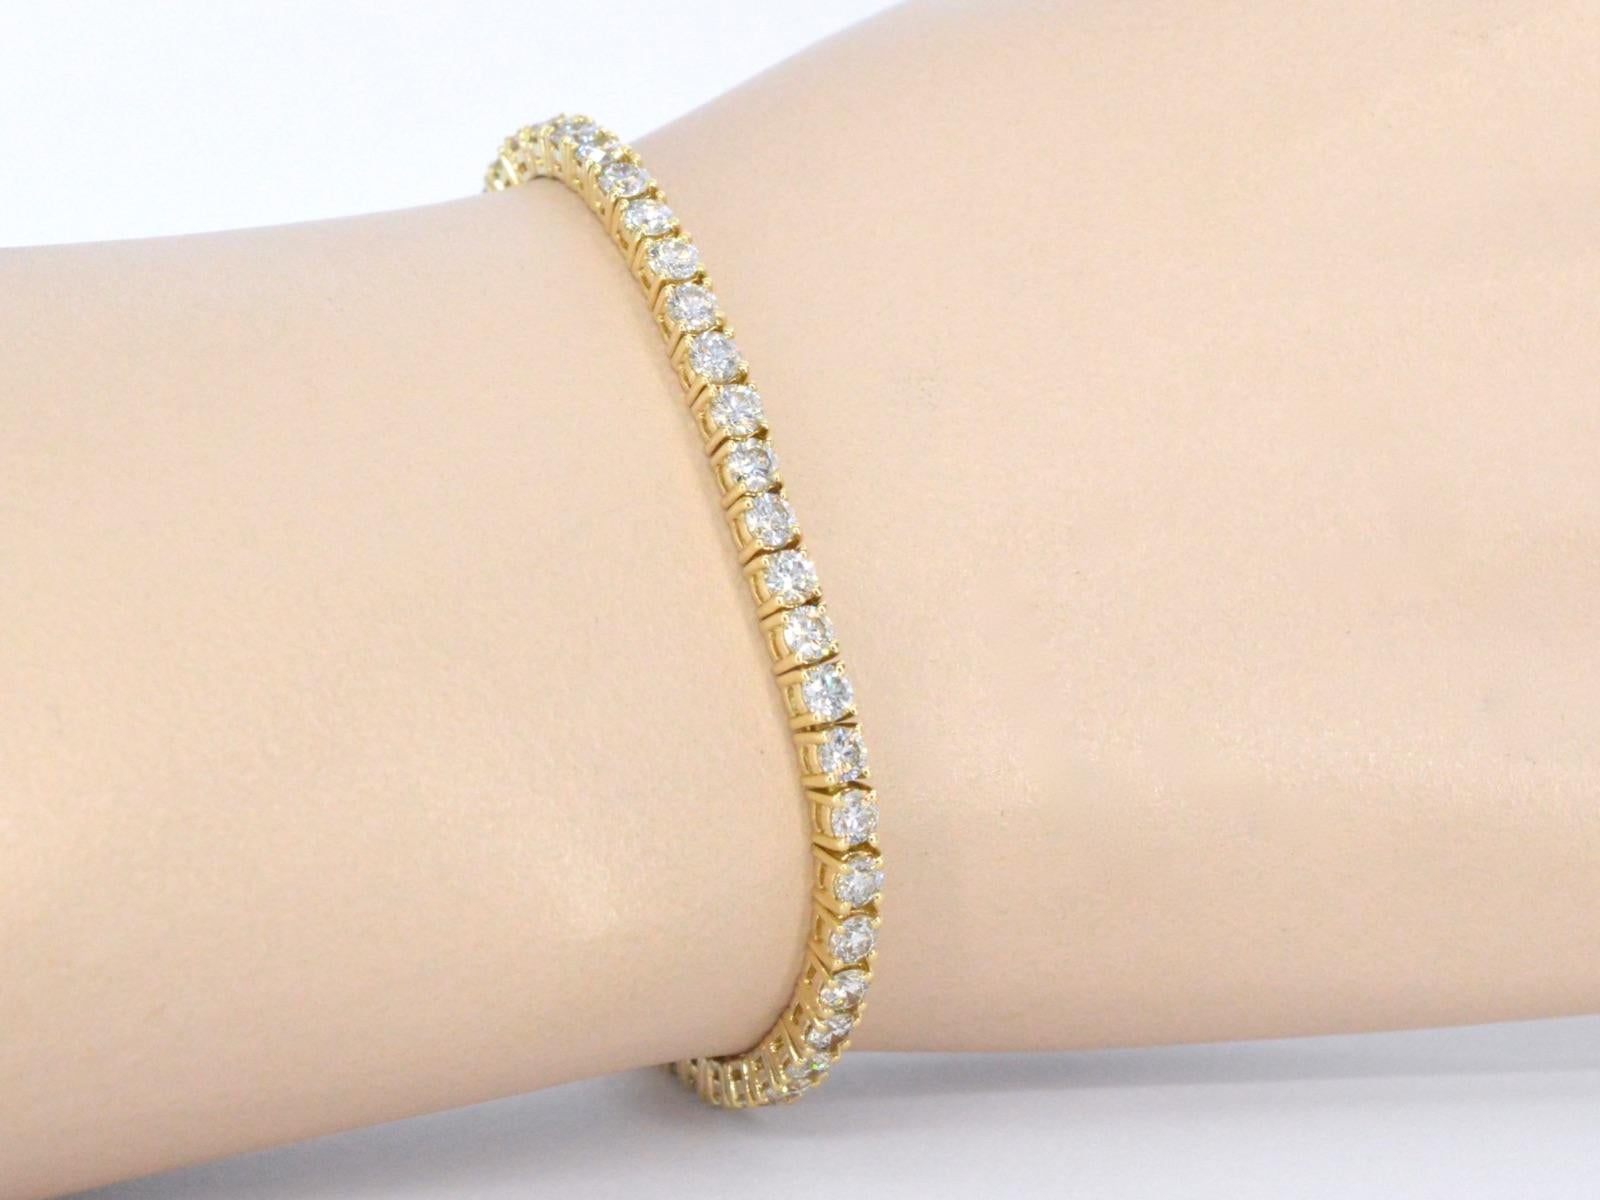 One 18 karat gold tennis bracelet with 56 sparkling white diamonds.

with 56 perfectly matching diamonds this bracelet is the ideal size for an exclusive tennis bracelet. The ideal bracelet that matches with everything and truly belongs to any